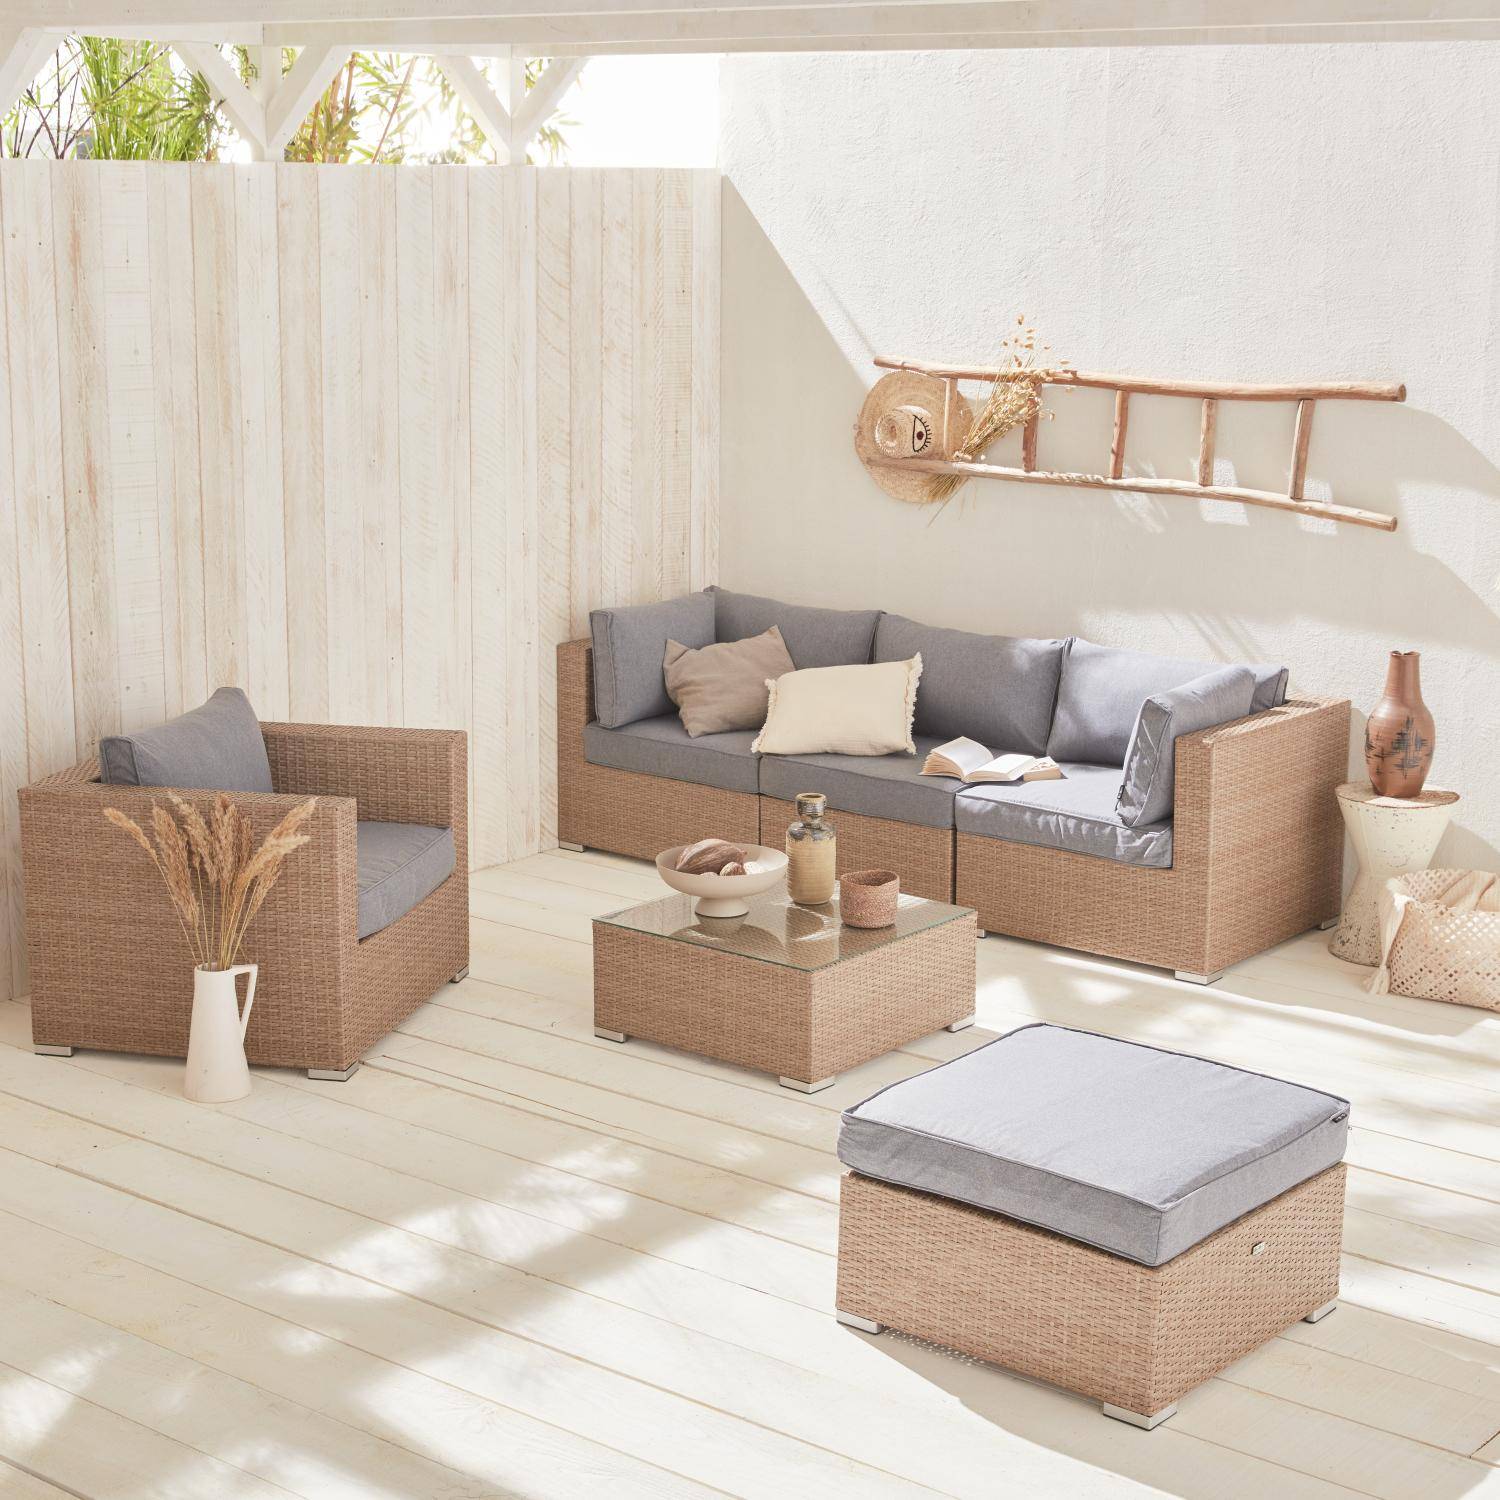 Ready assembled 5-seater polyrattan garden sofa set with coffee table, Beige & Light Heather Grey Photo1